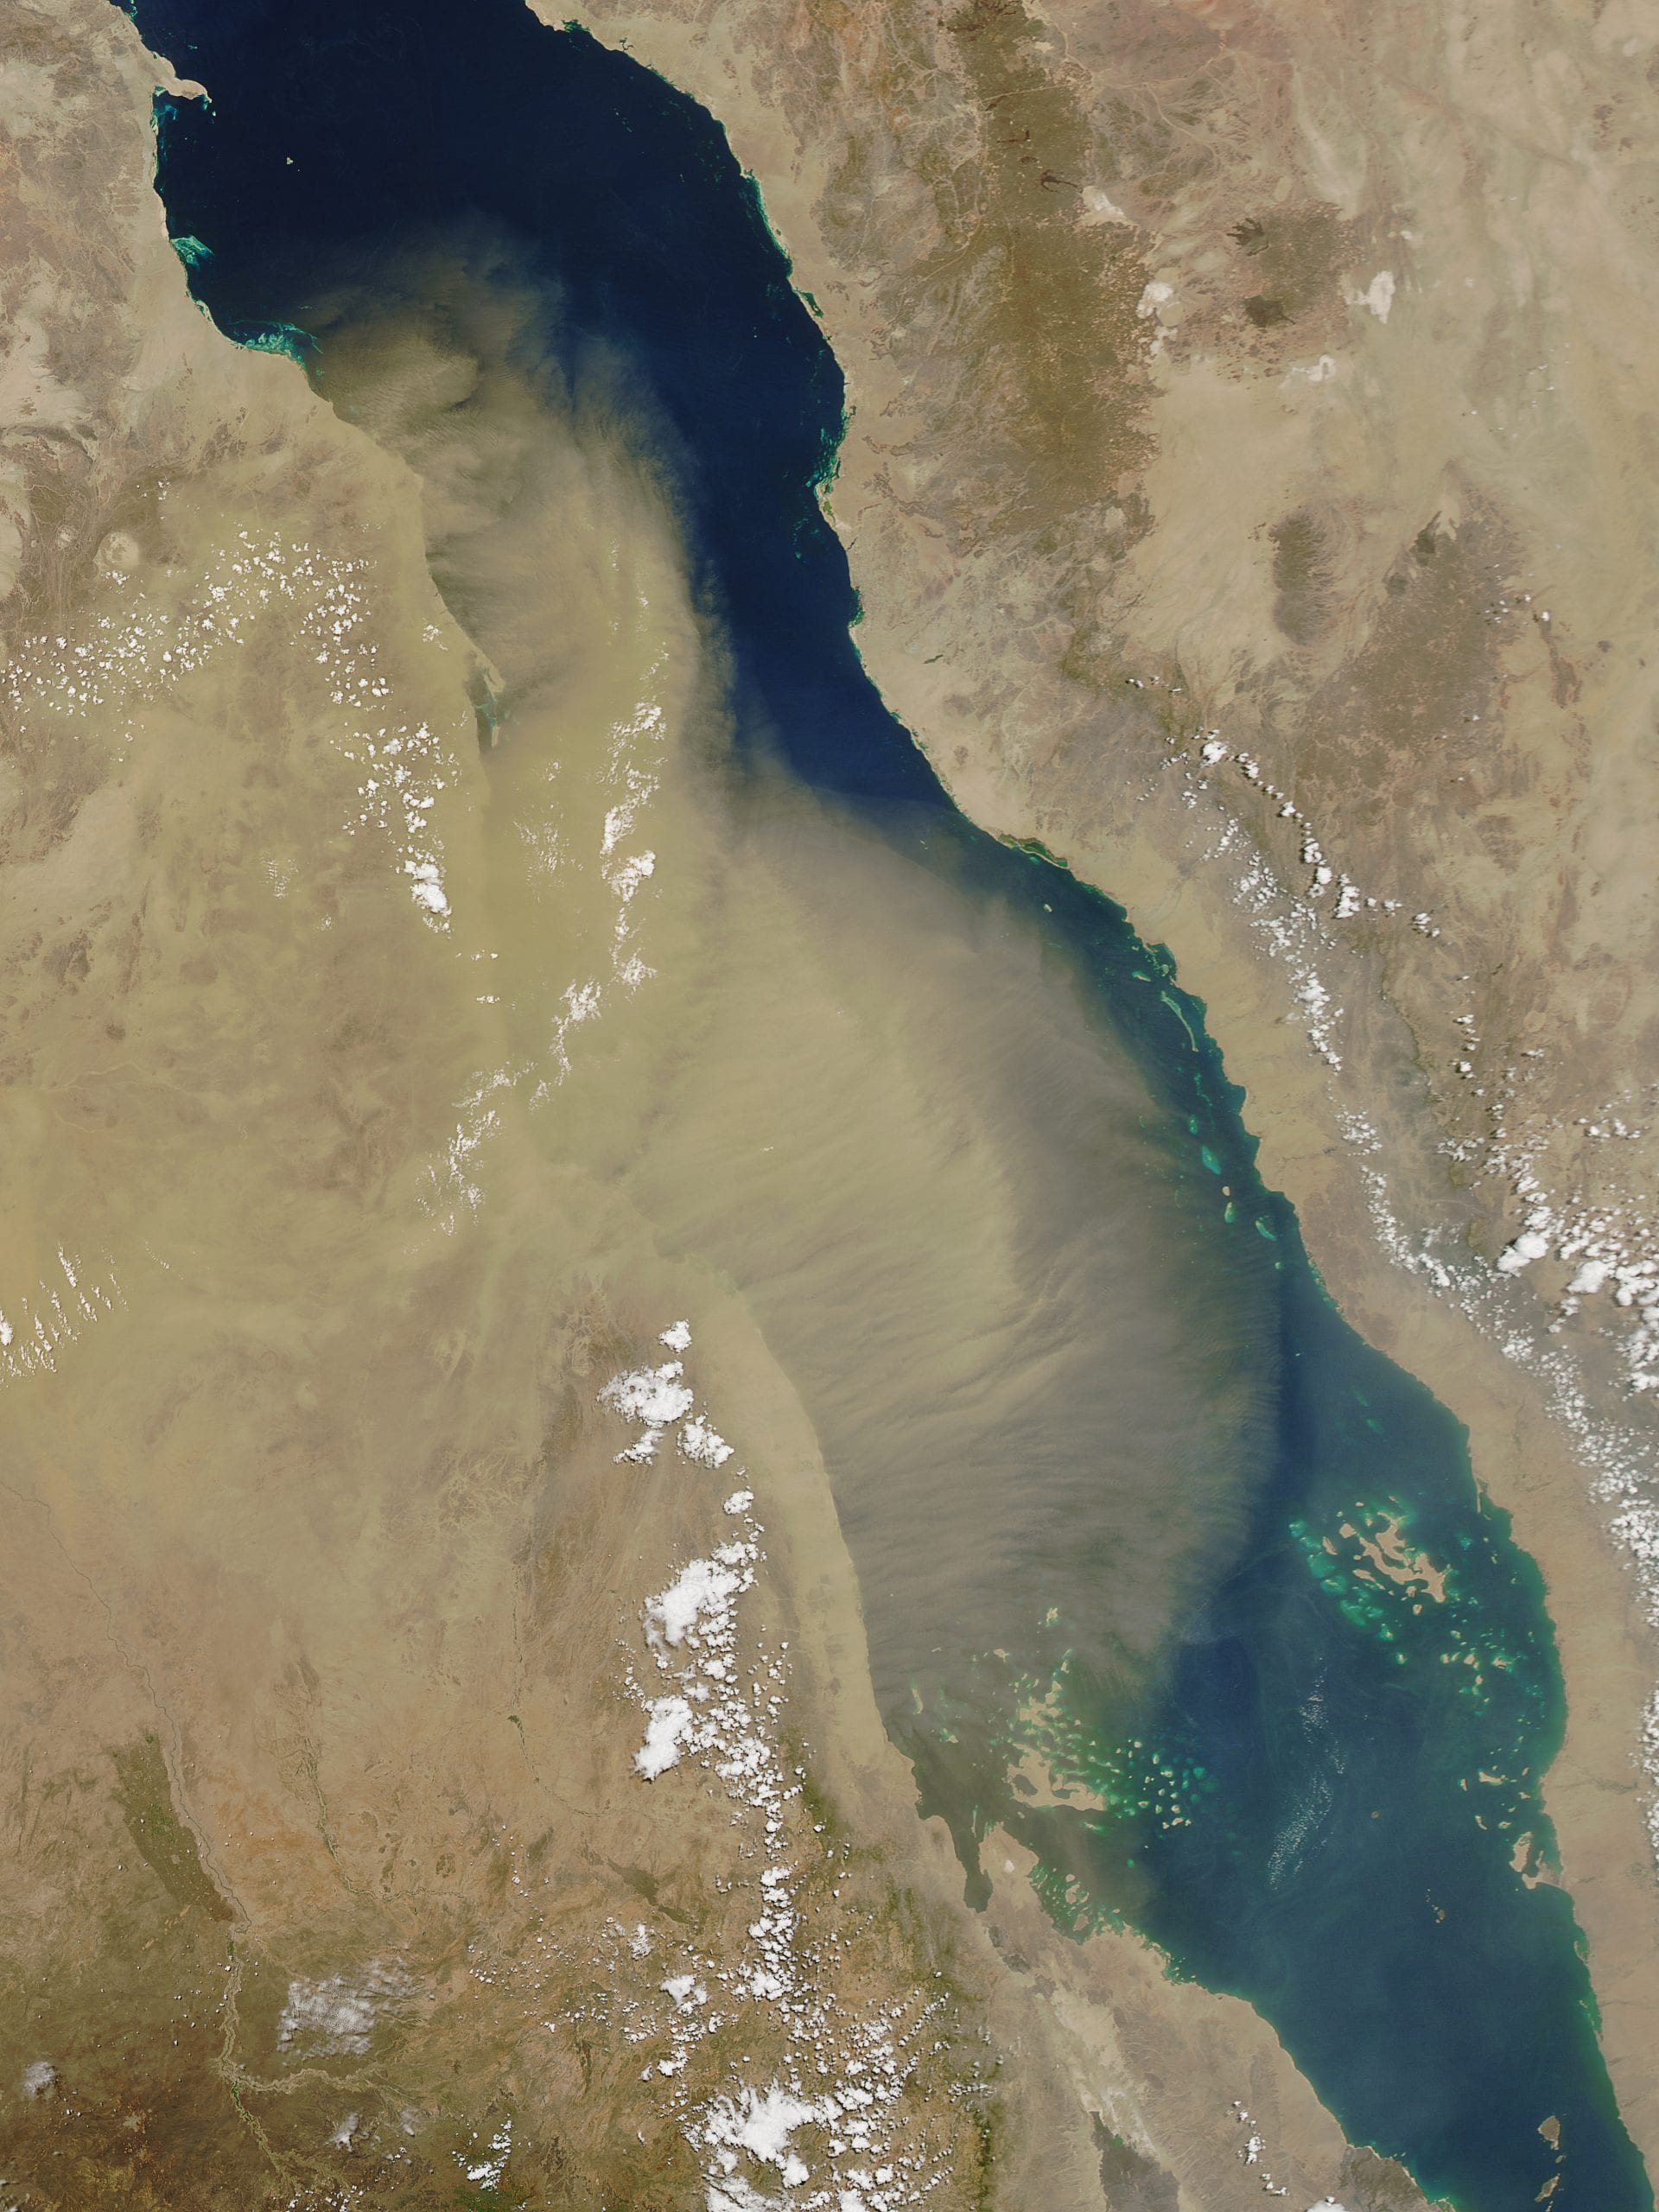 Mountain-gap winds blow dust into the Red Sea